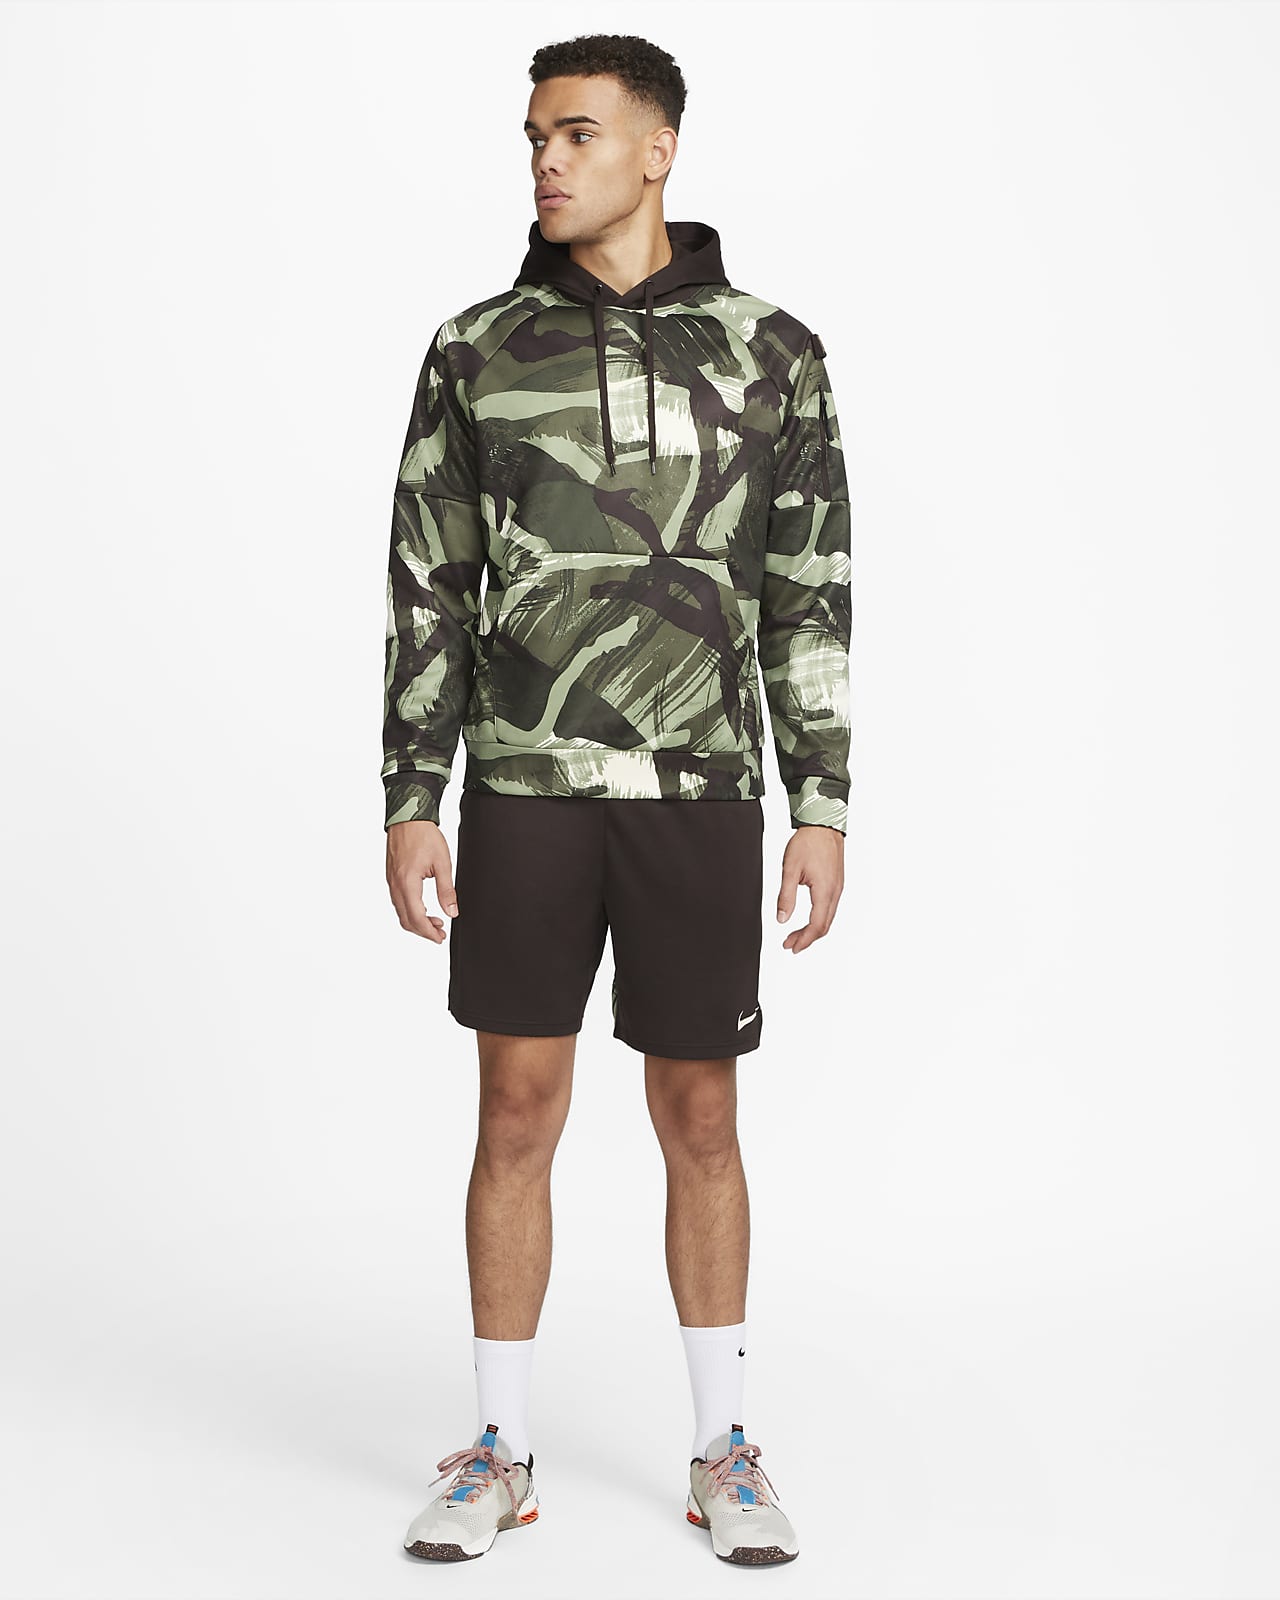 Therma-FIT Allover Camo Fitness Hoodie.